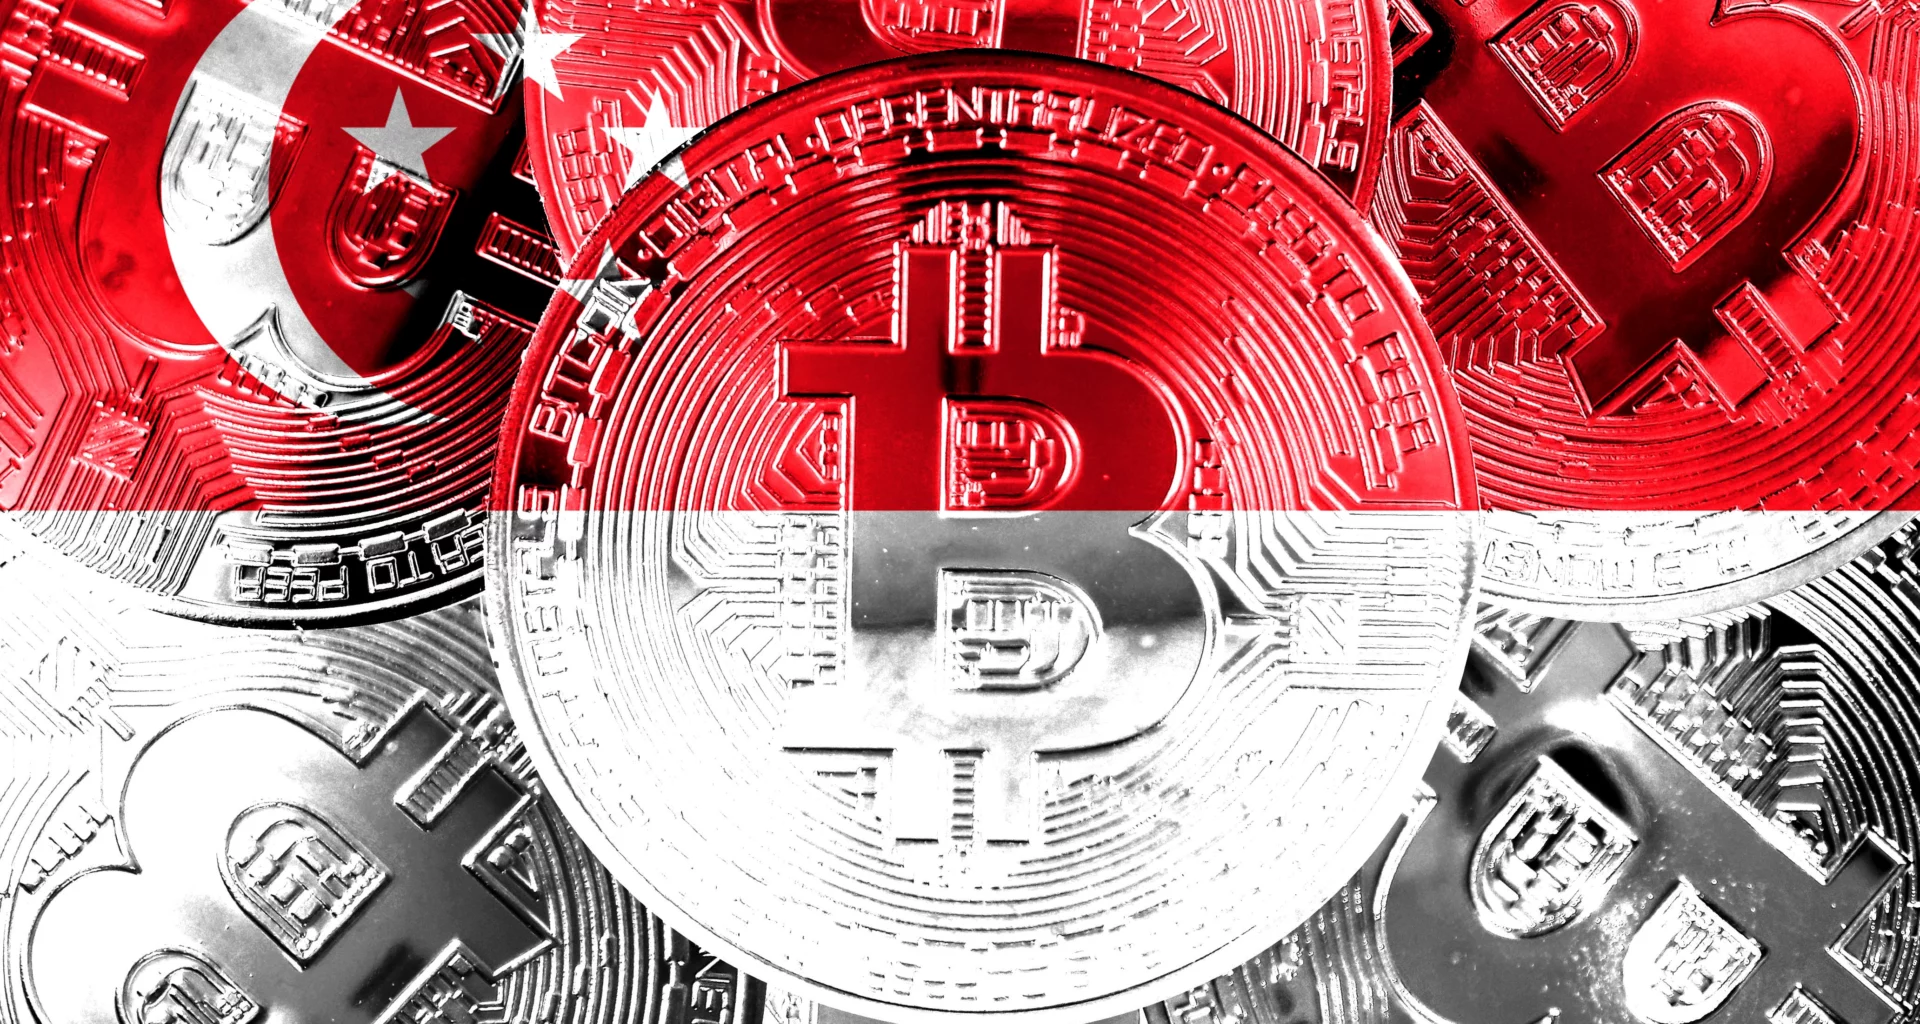 physical bitcoins coloured to resemble the Singapore flag